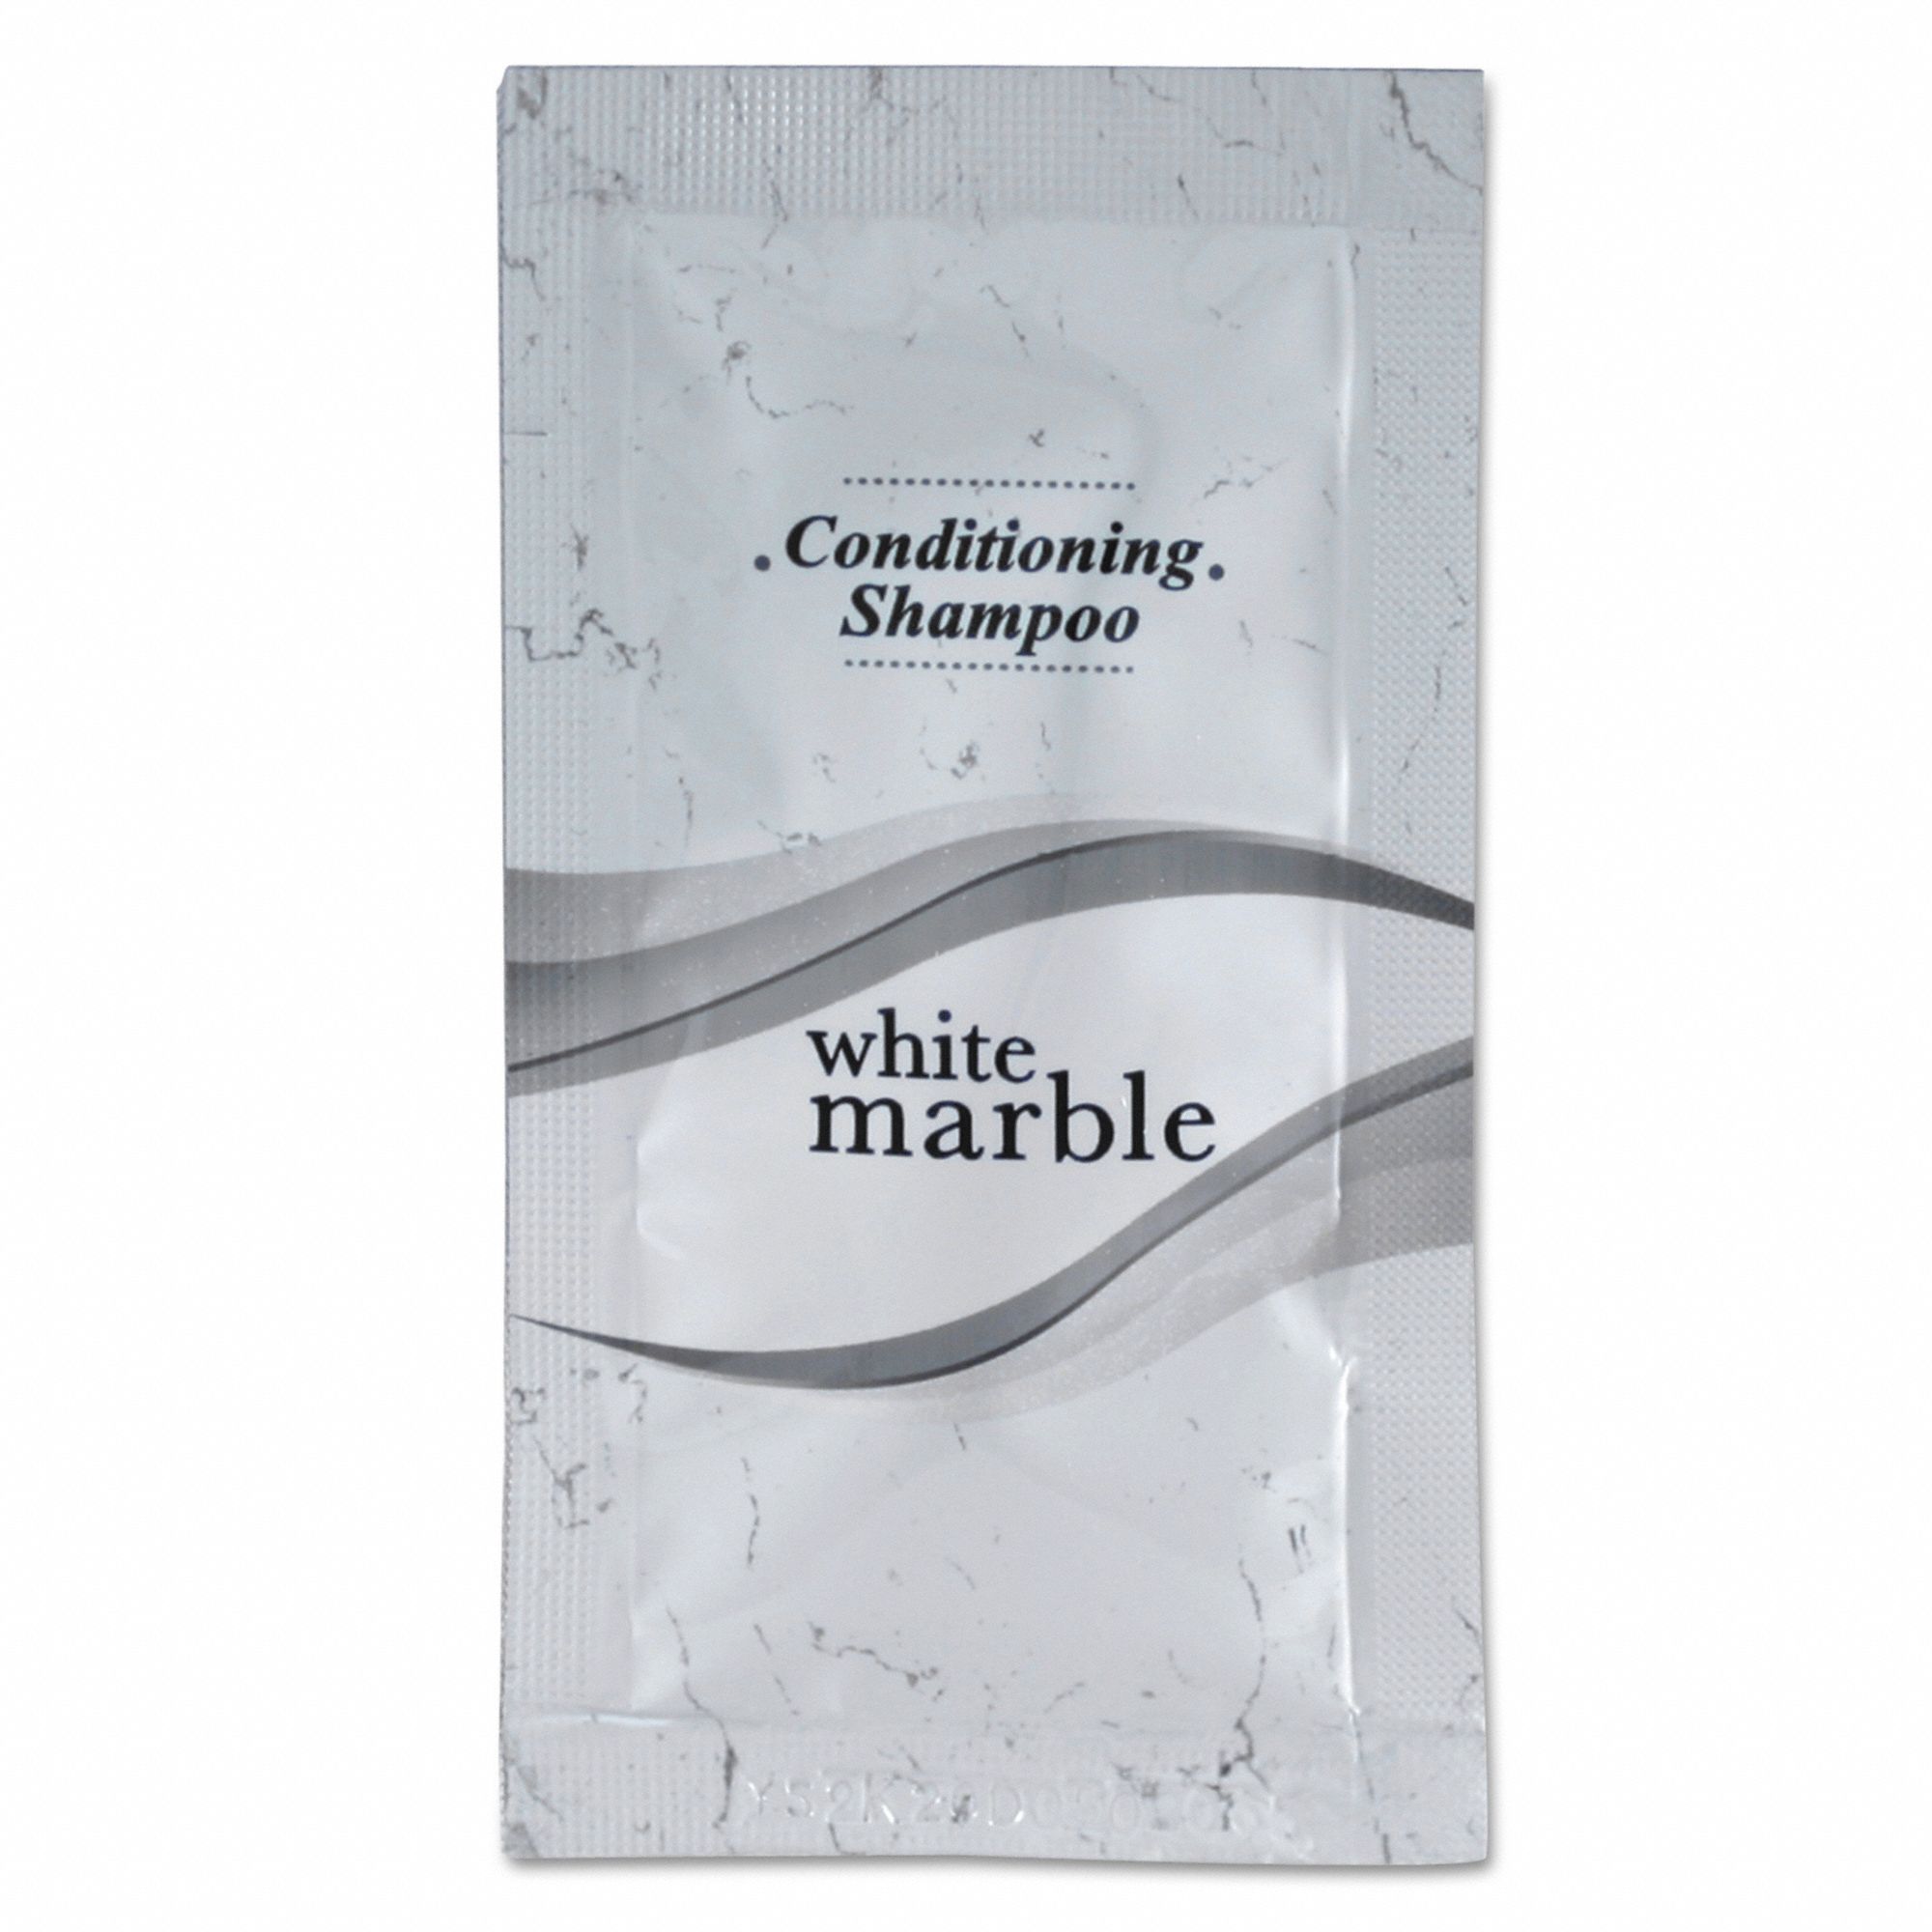 Hair Conditioner: Packet, 0.25 oz Size, Clean, White Marble, Aloe Vera, 500 PK